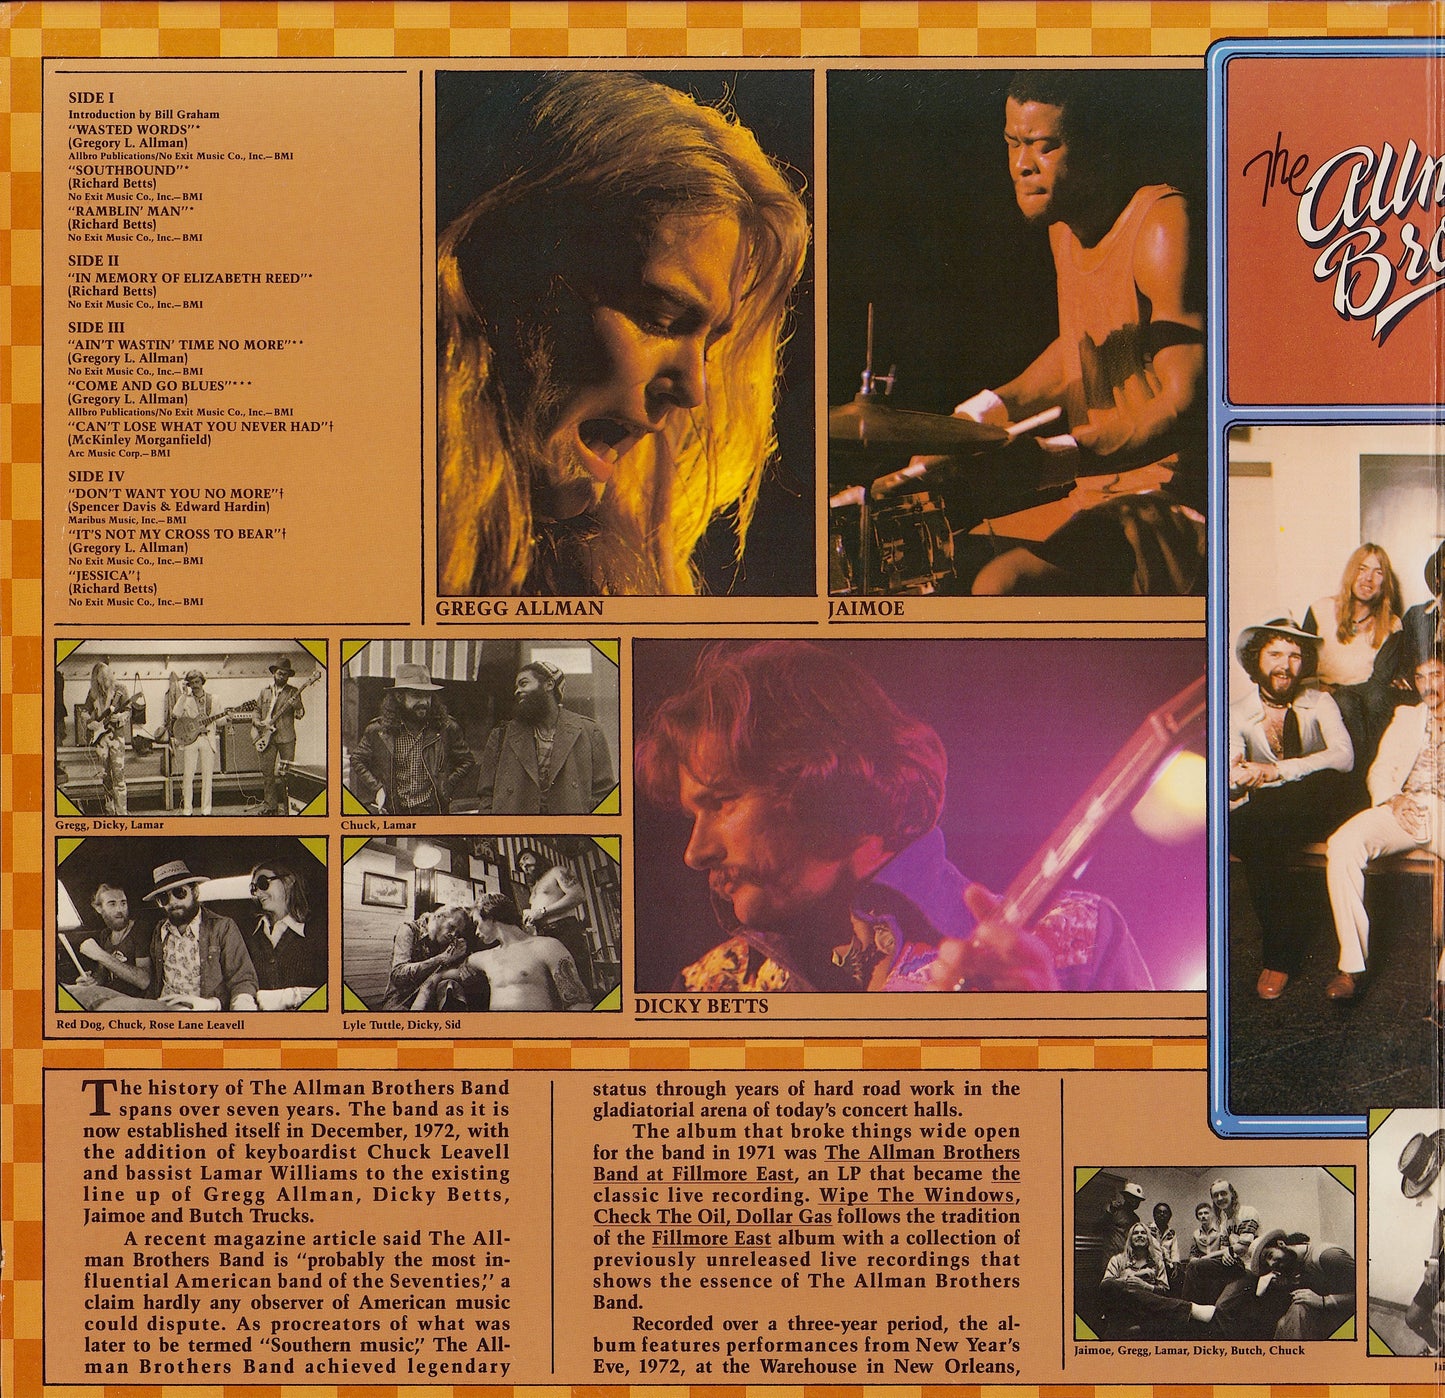 The Allman Brothers Band - Wipe The Windows, Check The Oil, Dollar Gas (Vinyl 2LP)